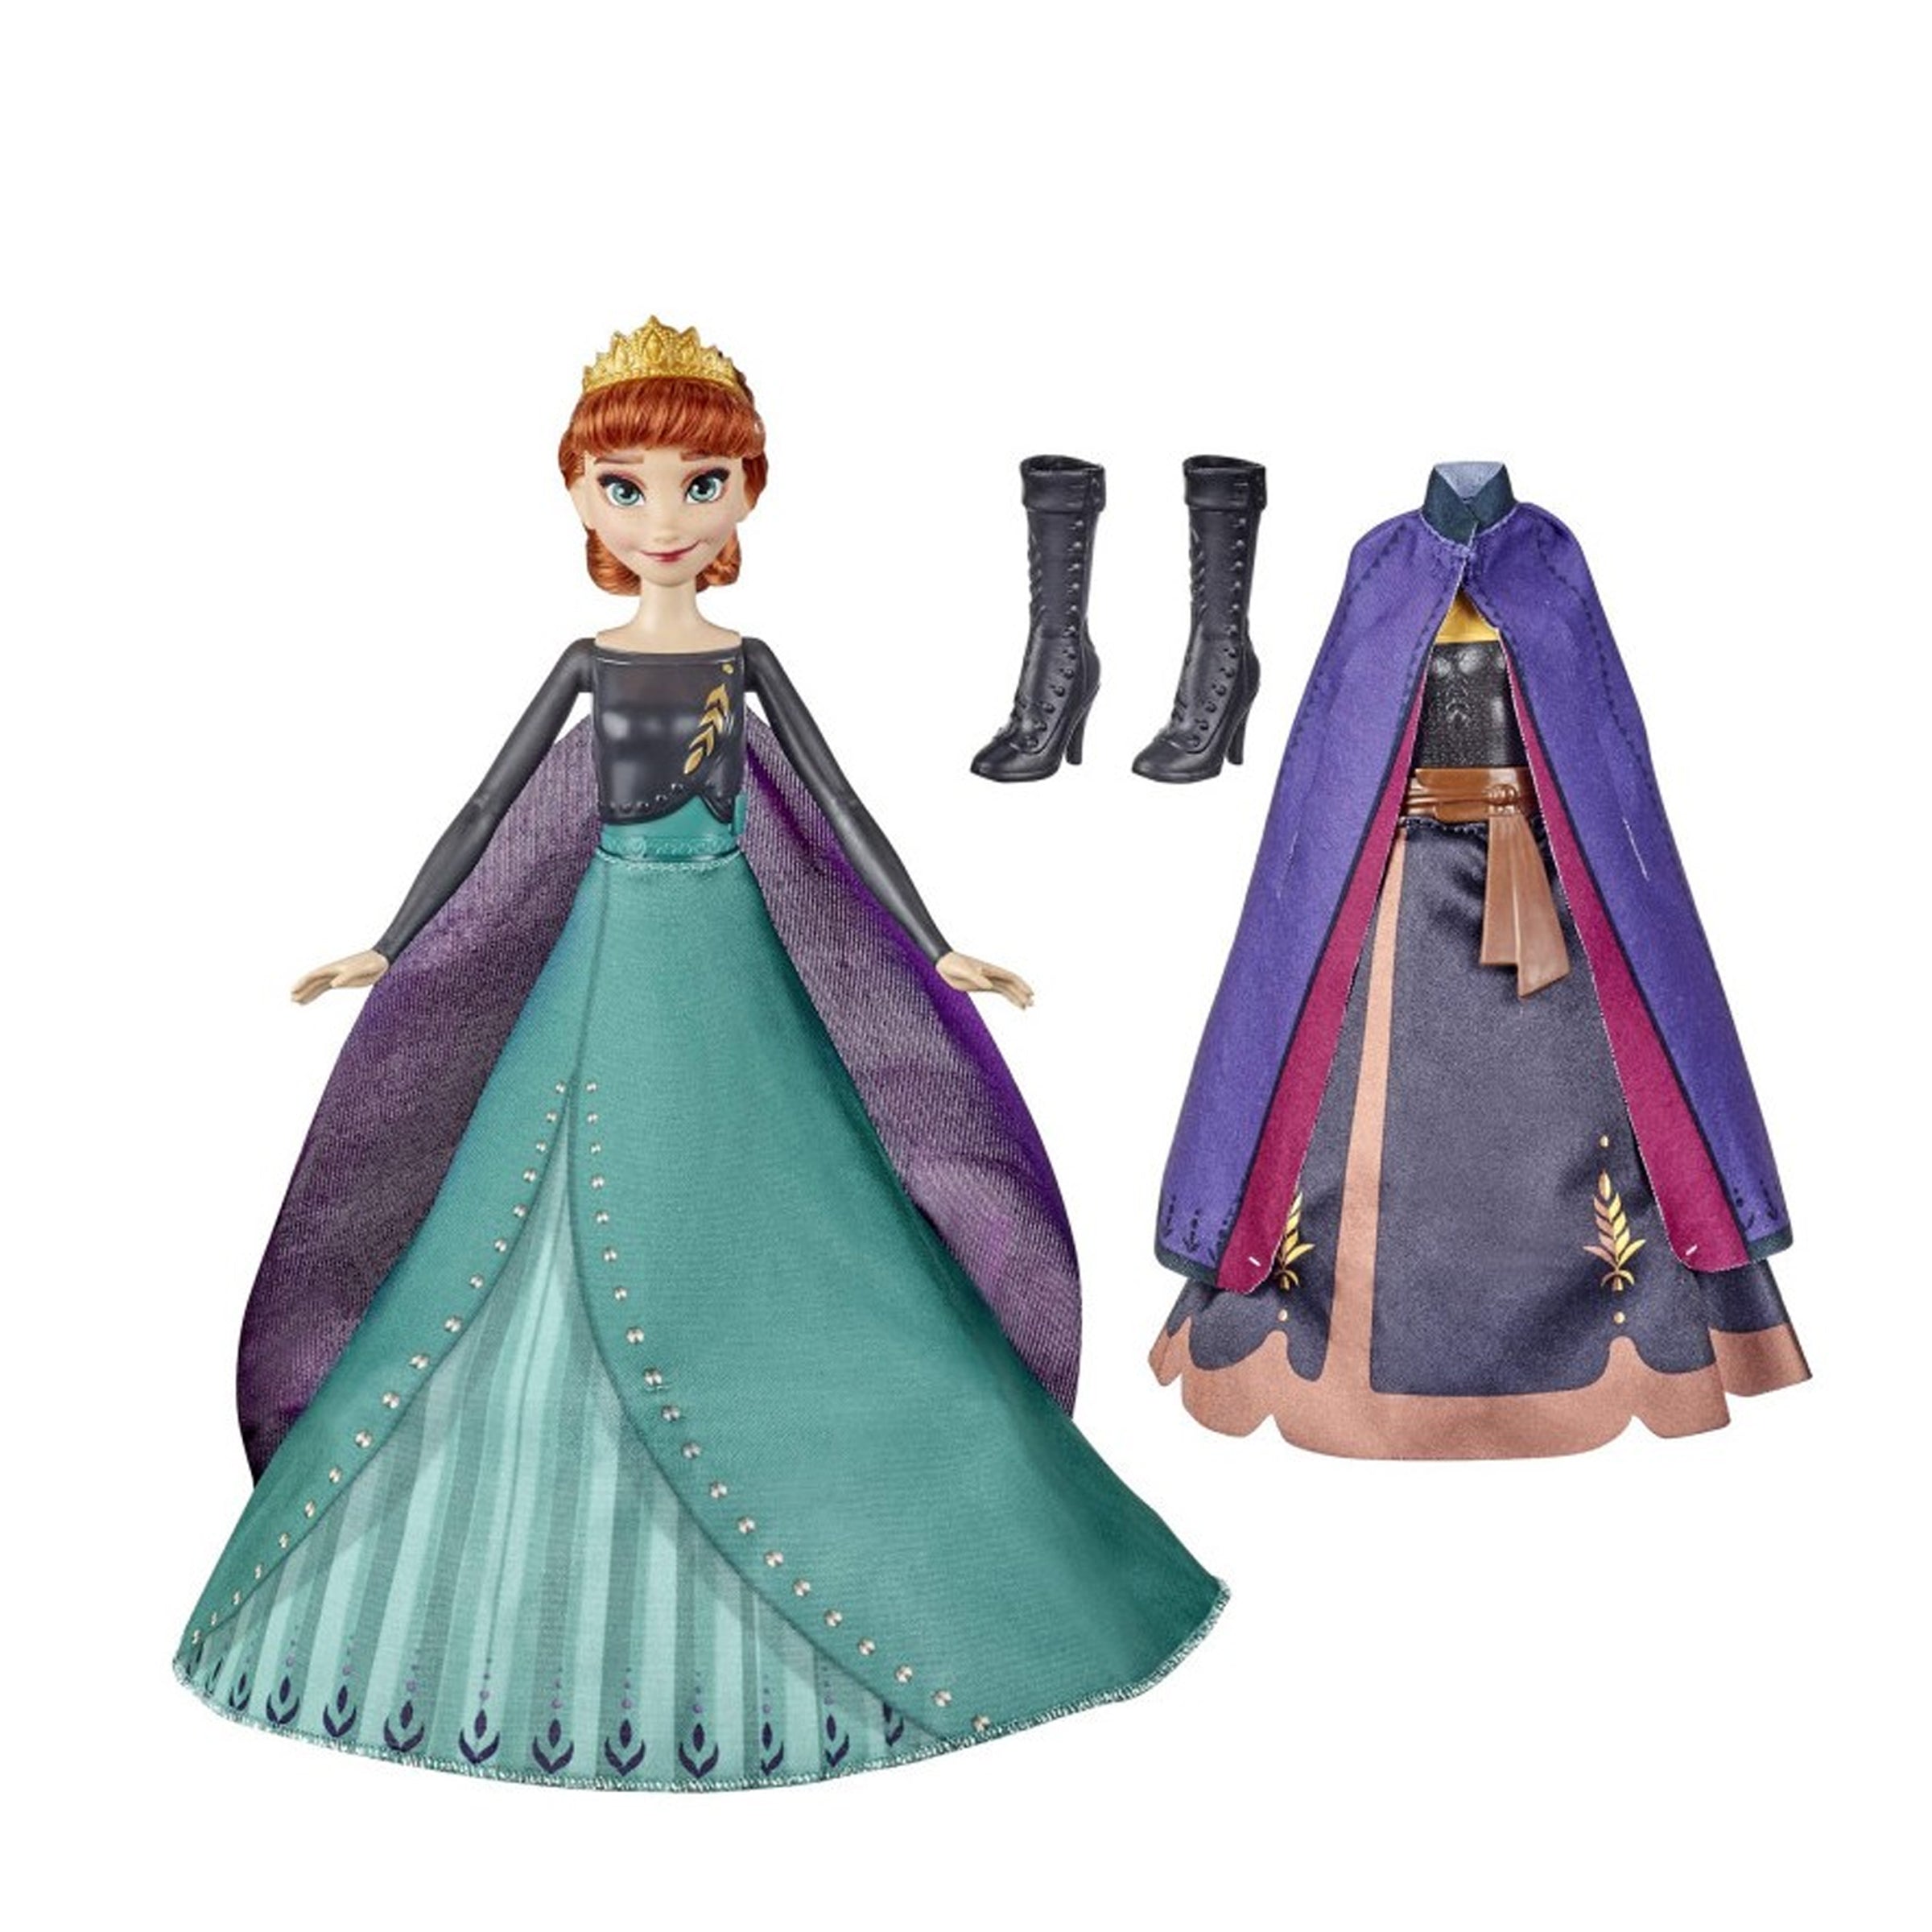 Disney Frozen - Queen Transformation Doll (Styles Vary - One Supplied)